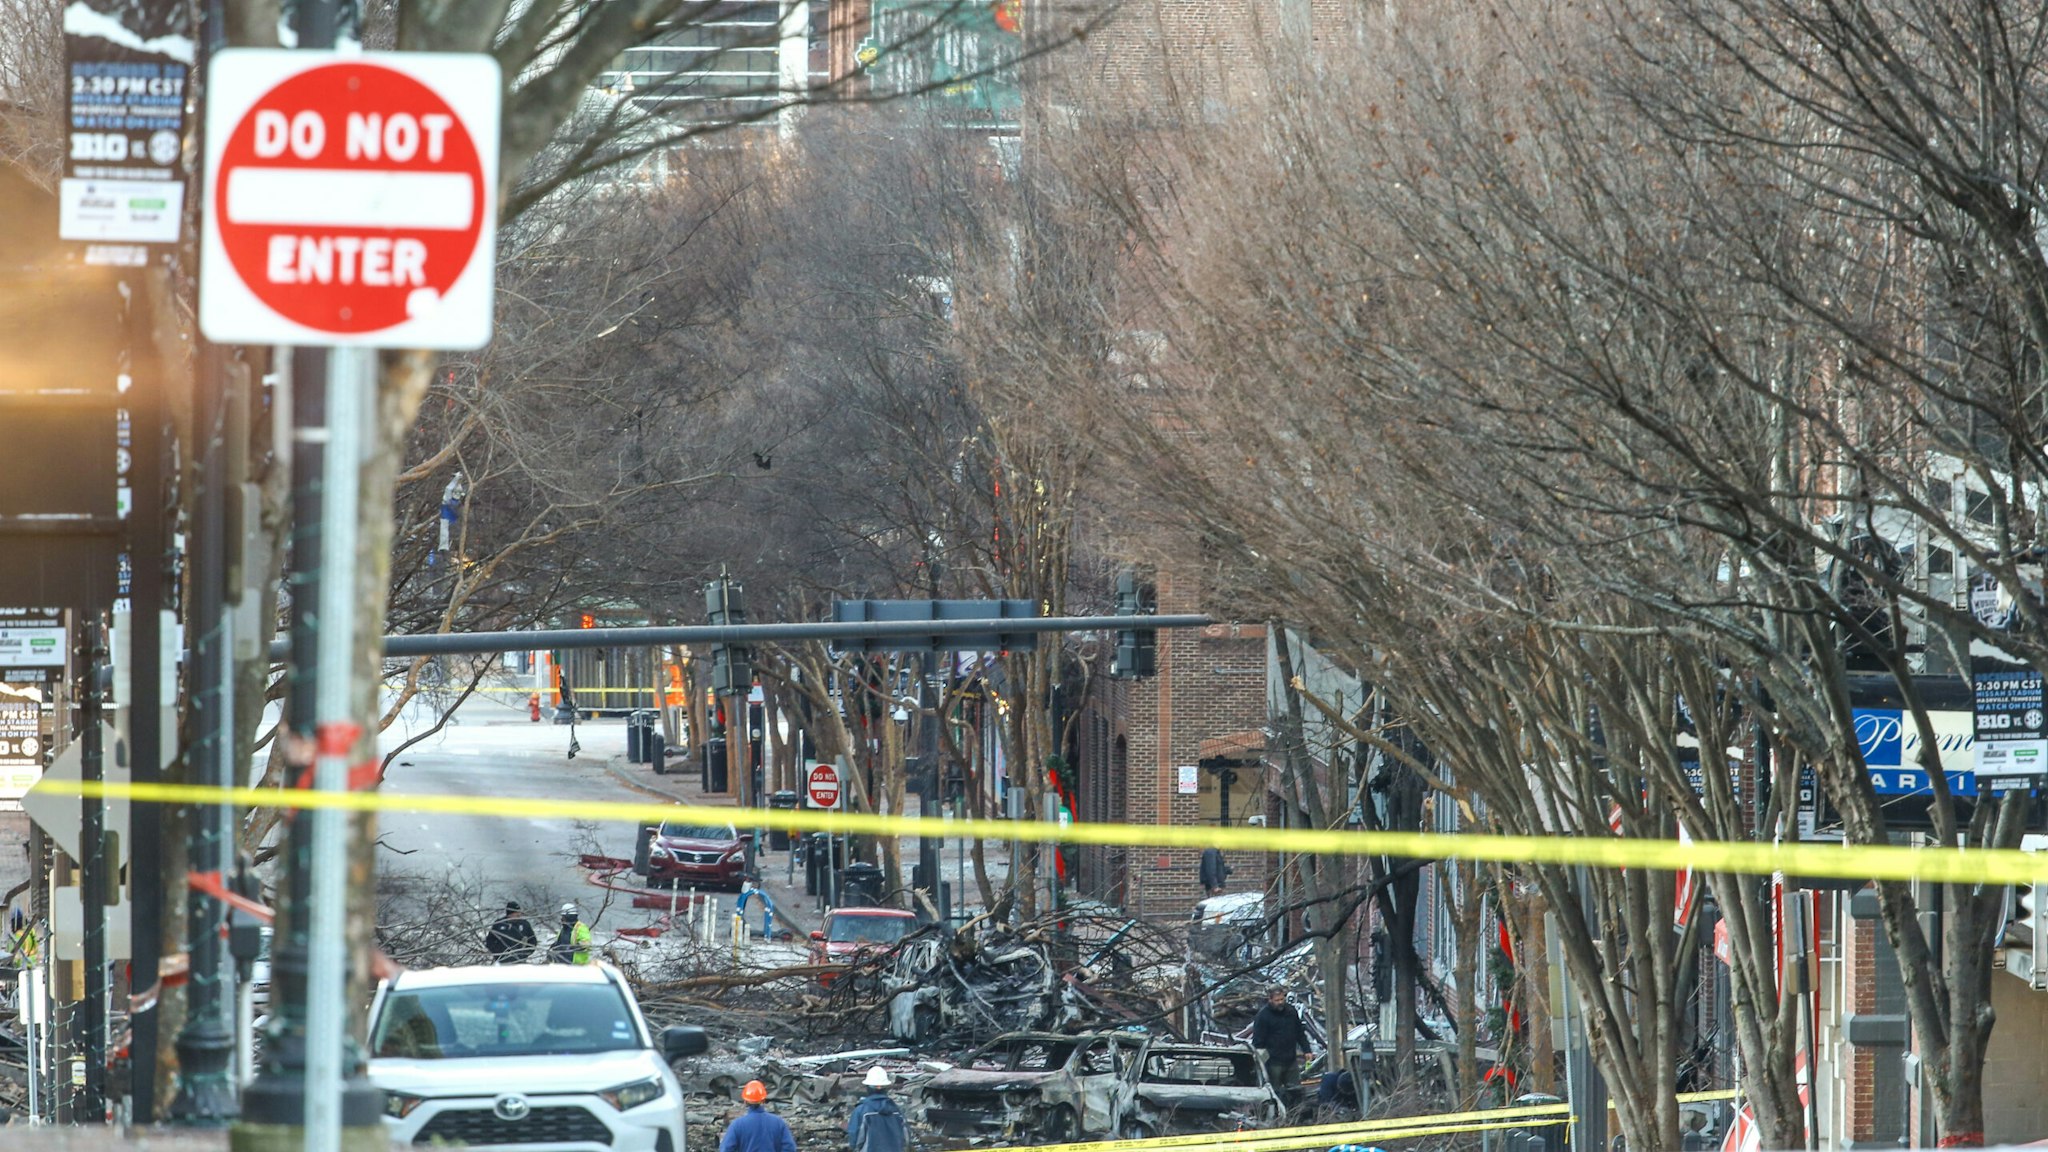 Police close off an area damaged by an explosion on Christmas morning on December 25, 2020 in Nashville, Tennessee.